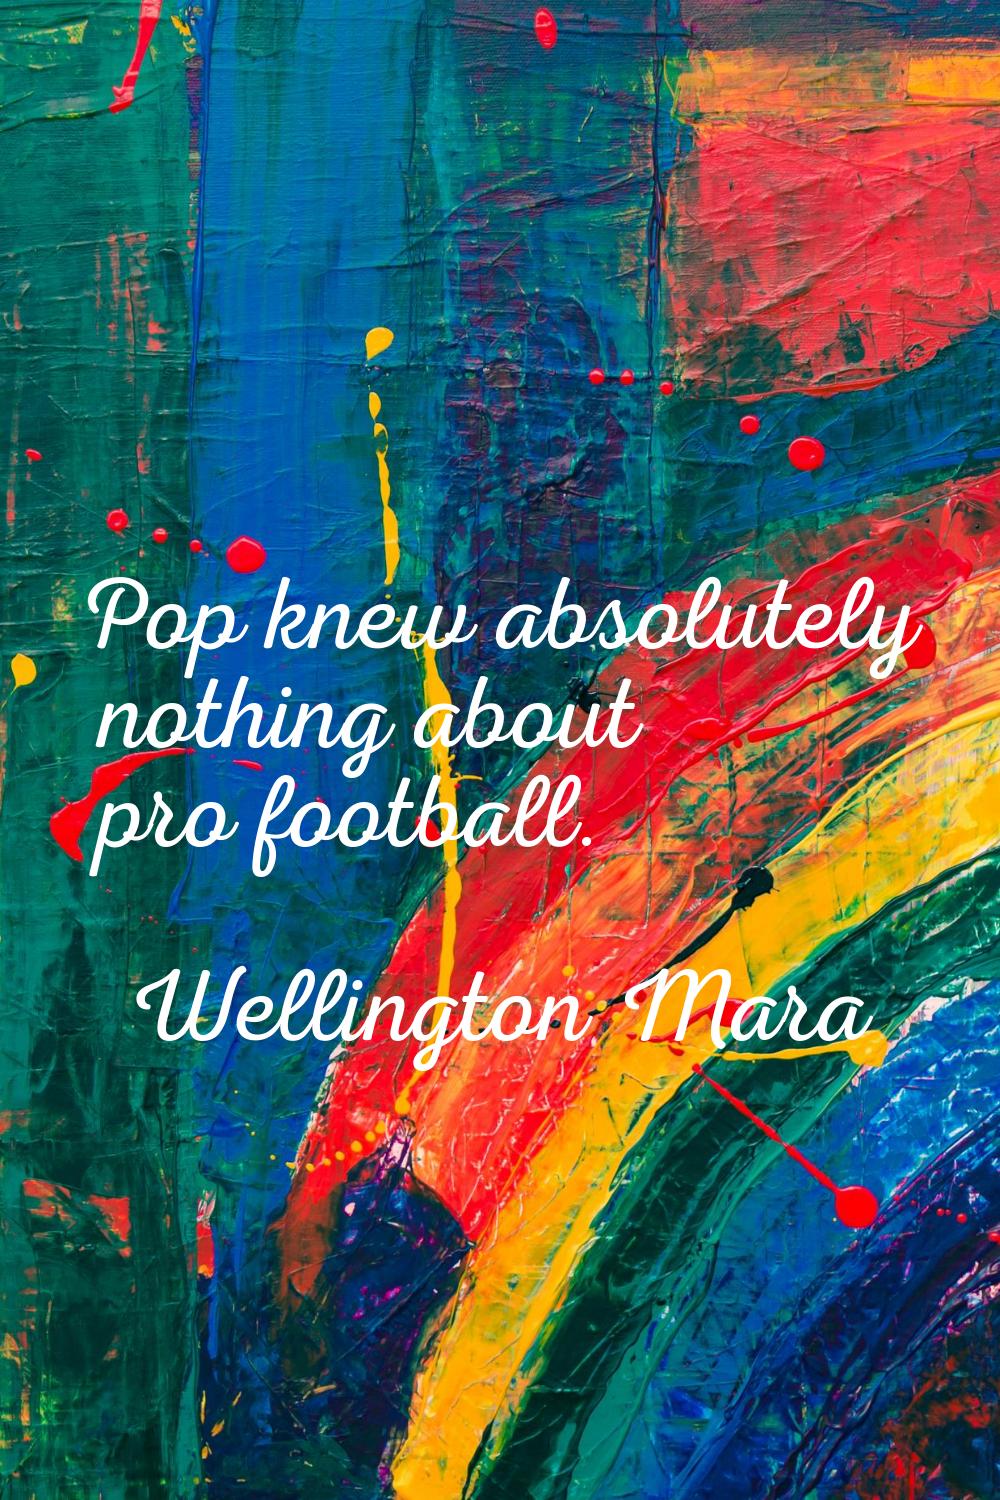 Pop knew absolutely nothing about pro football.